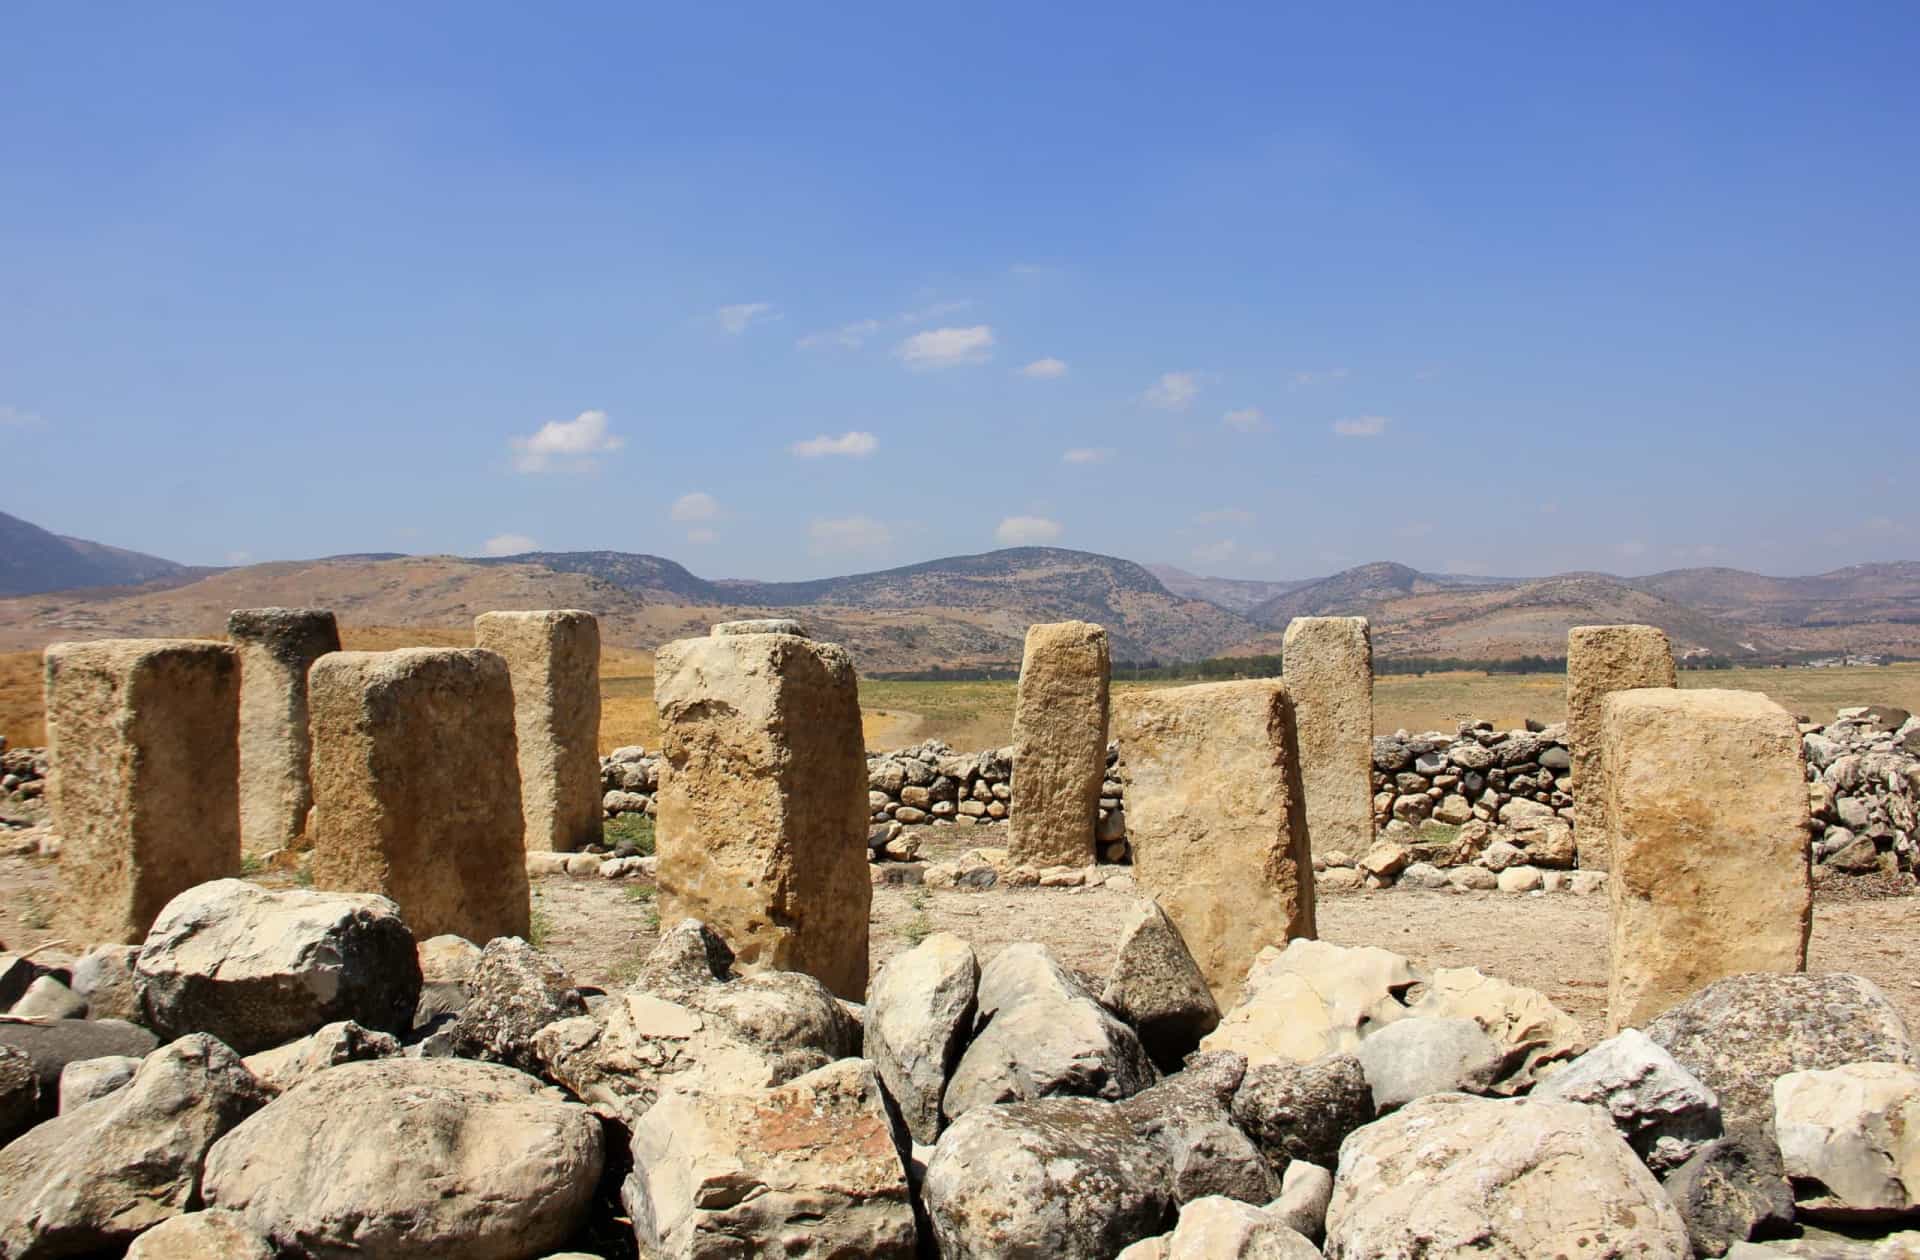 <p>Tel Hazor in Israel's Upper Galilee is described in the Old Testament as being the site of one of Joshua's key victories in his conquest of Canaan after Moses' death. The ruins are now a key feature of a national park.</p>